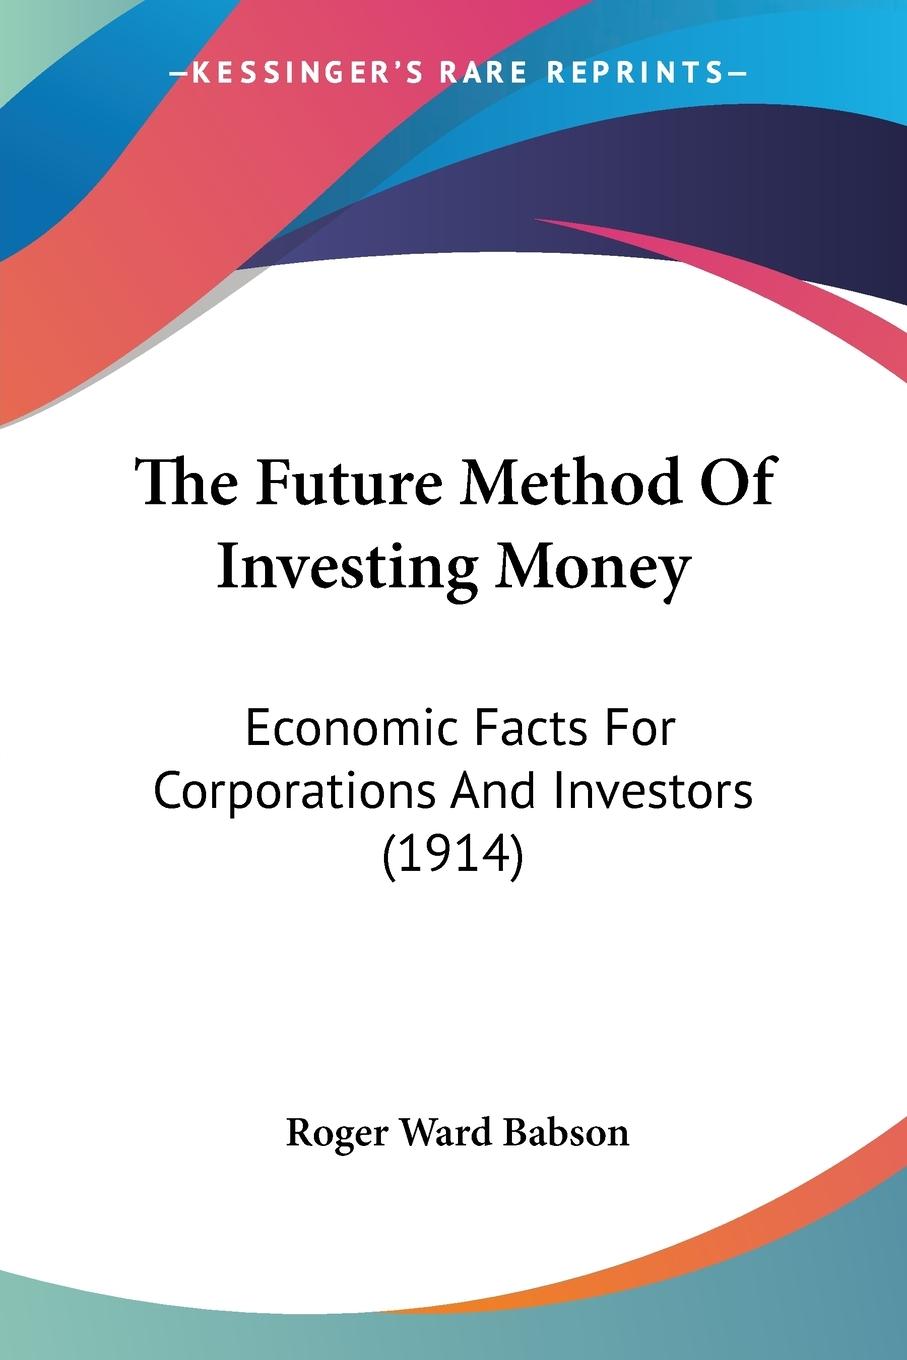 The Future Method Of Investing Money - Babson, Roger Ward